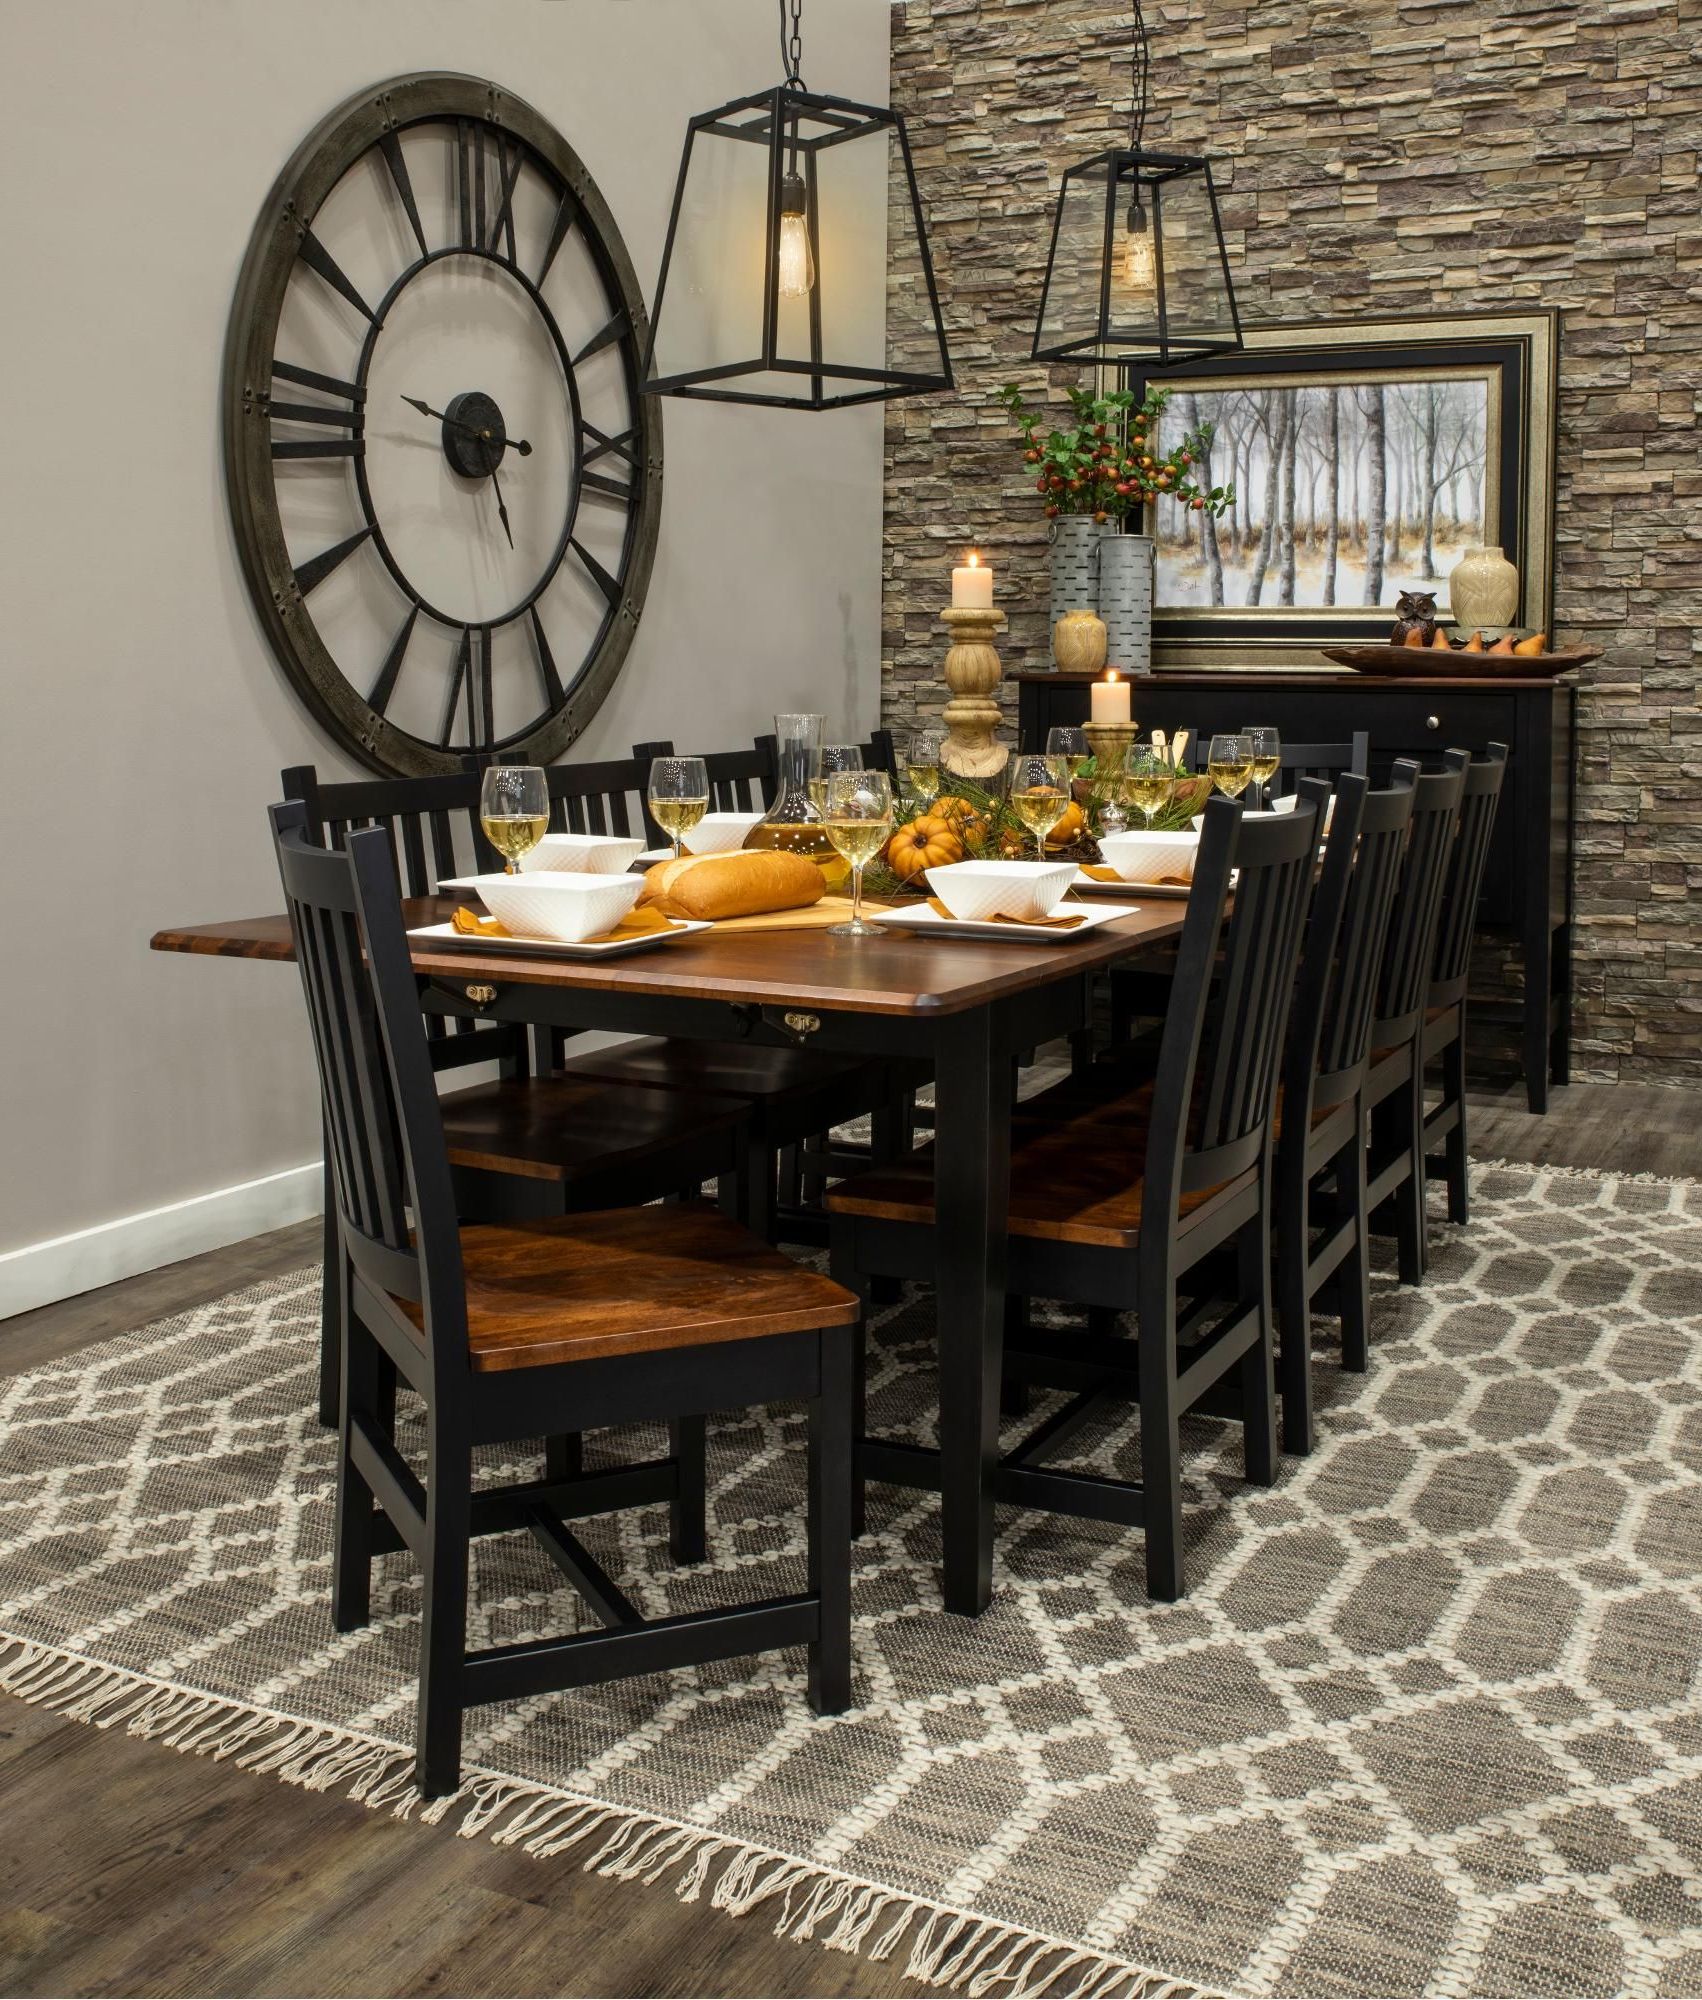 Brown Dining Tables With Removable Leaves With Regard To Most Recent Maple Two Tone 5 Leaf Dining Room Table – Saber (View 10 of 15)